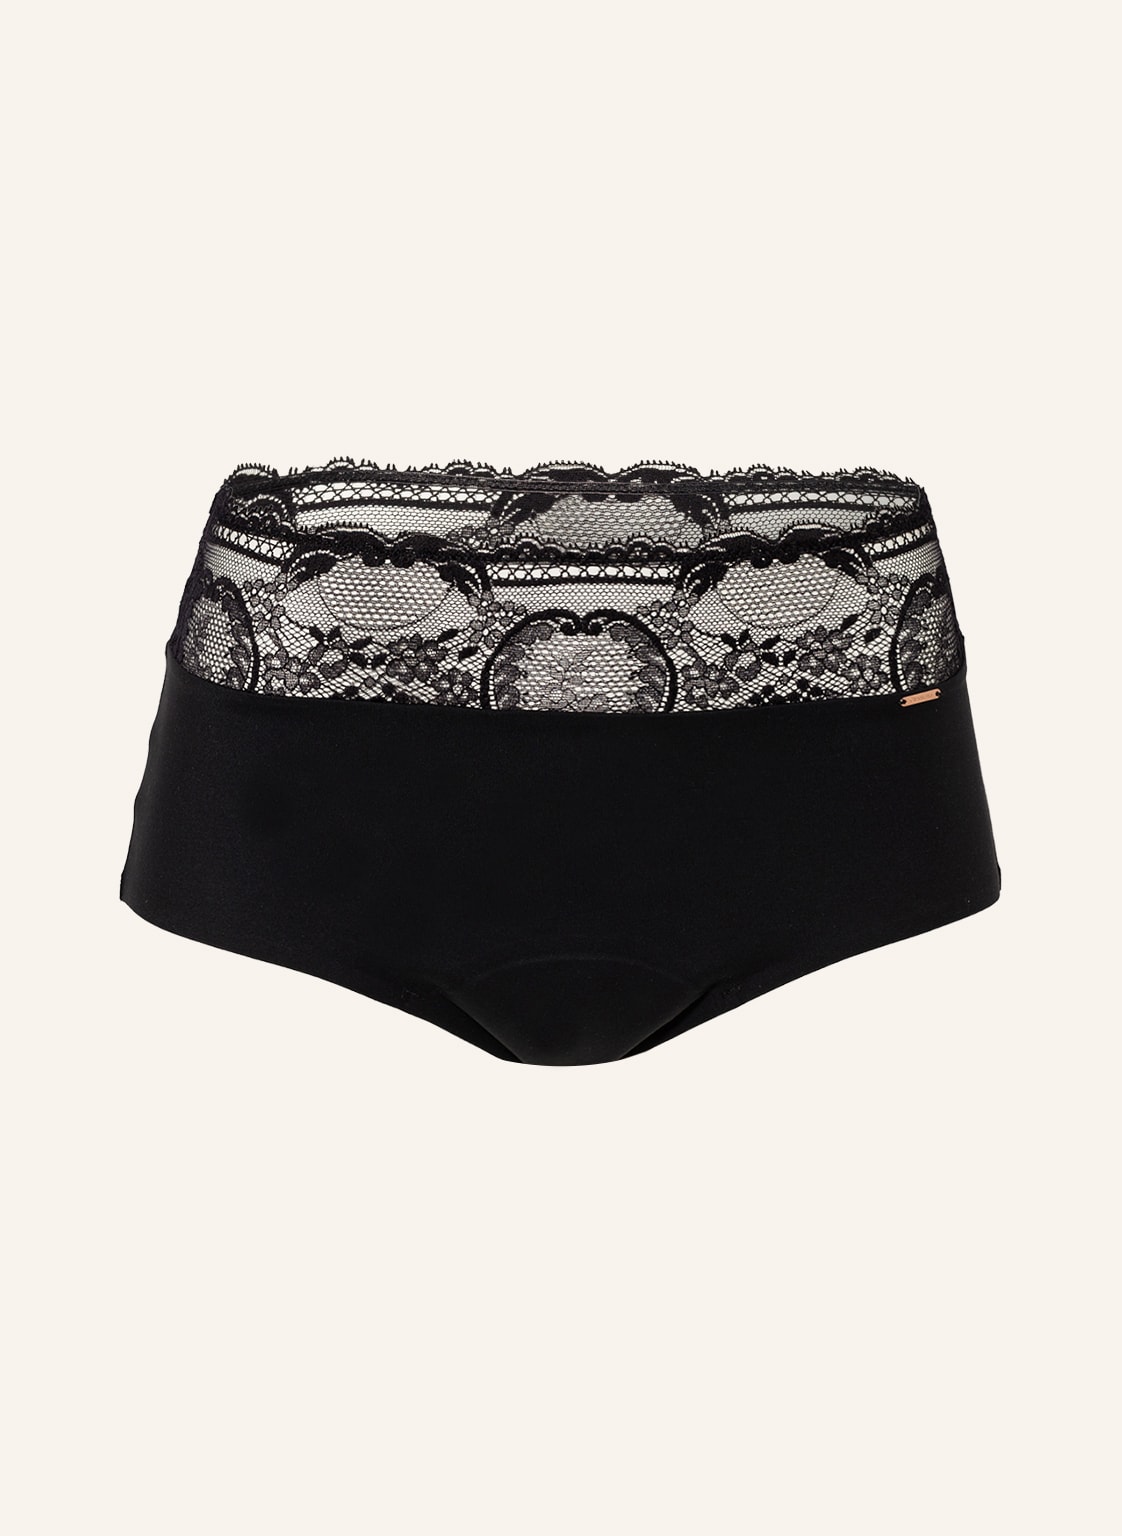 Image of Chantelle Periodenslip Lace schwarz